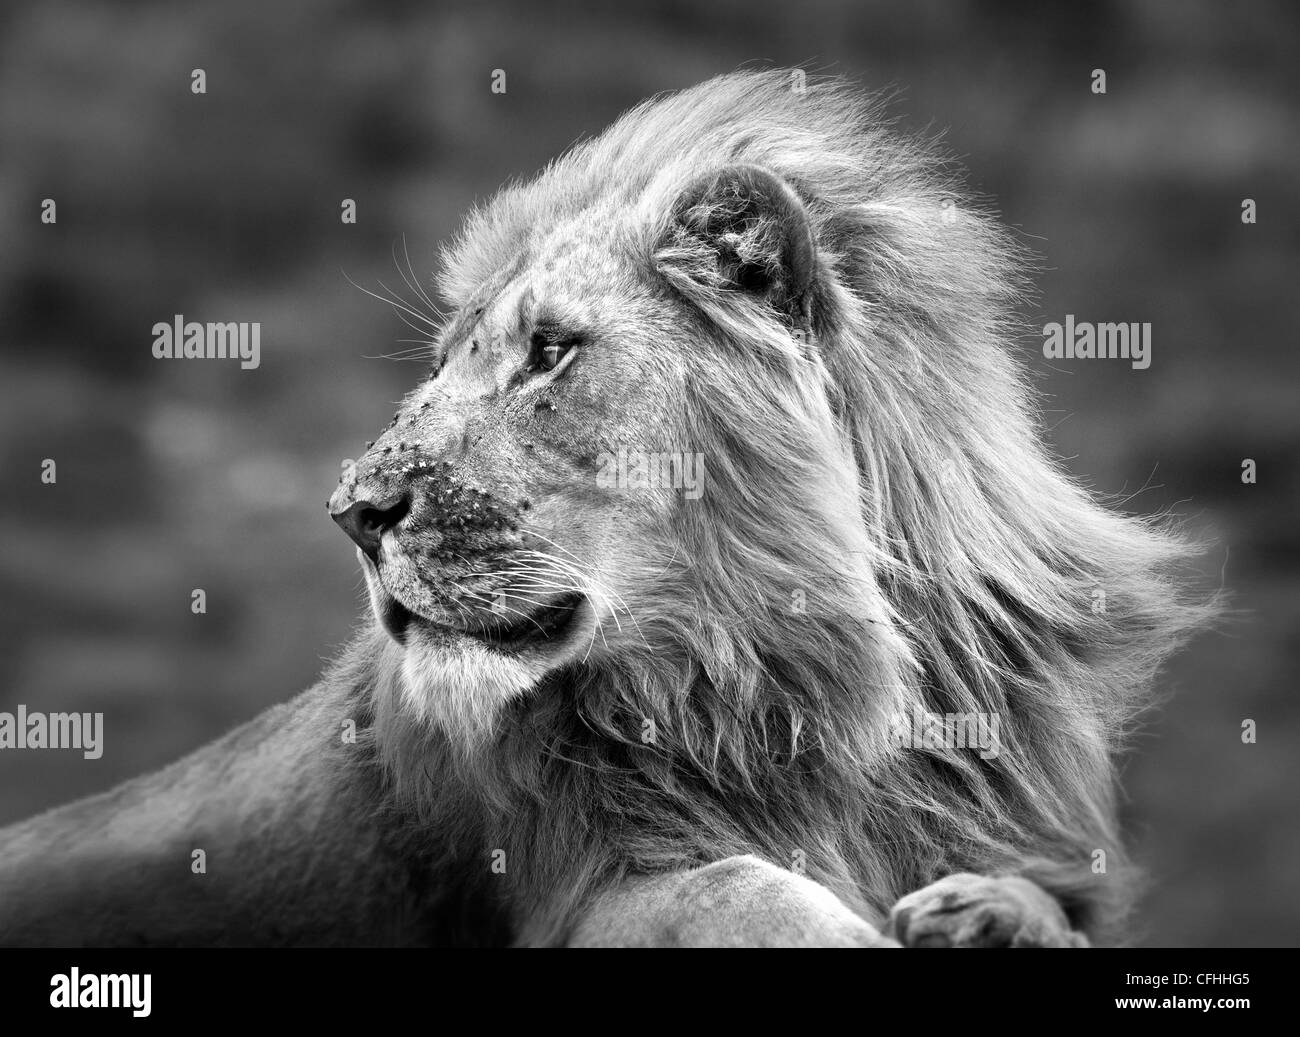 African lion portrait, South Africa Stock Photo